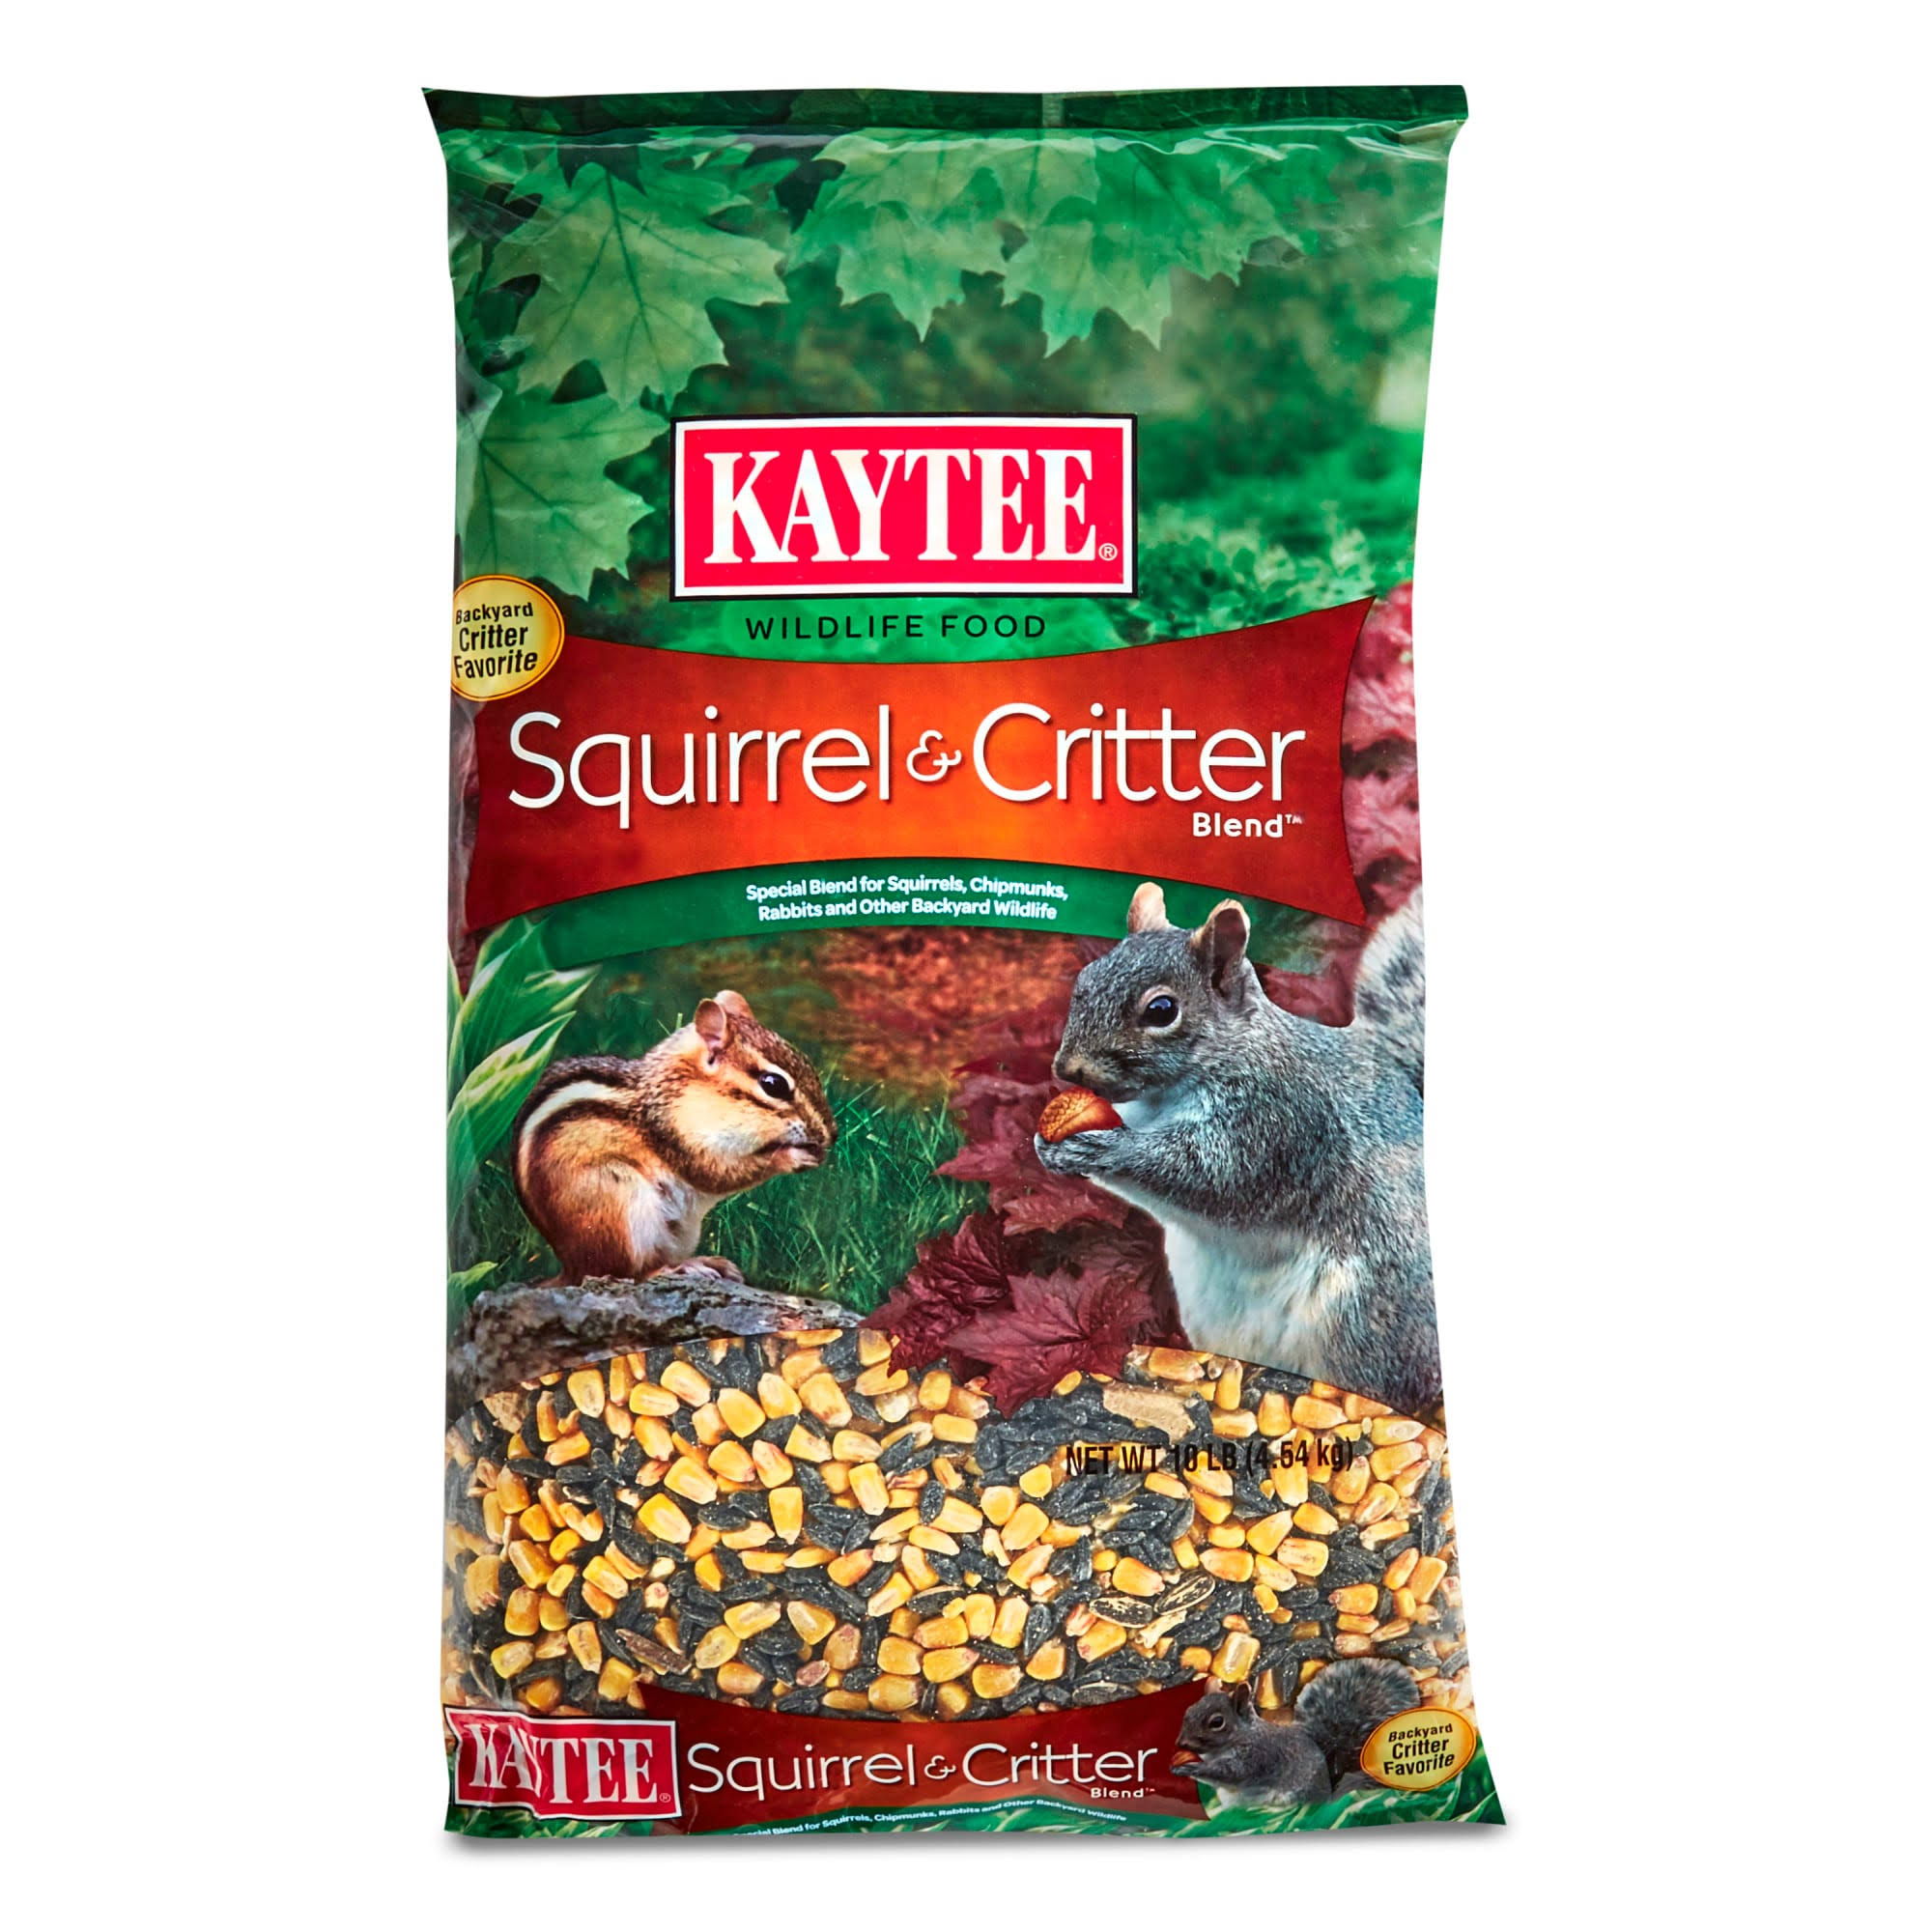 Kaytee Squirrel and Critter Blend Wildlife Food - 10lbs